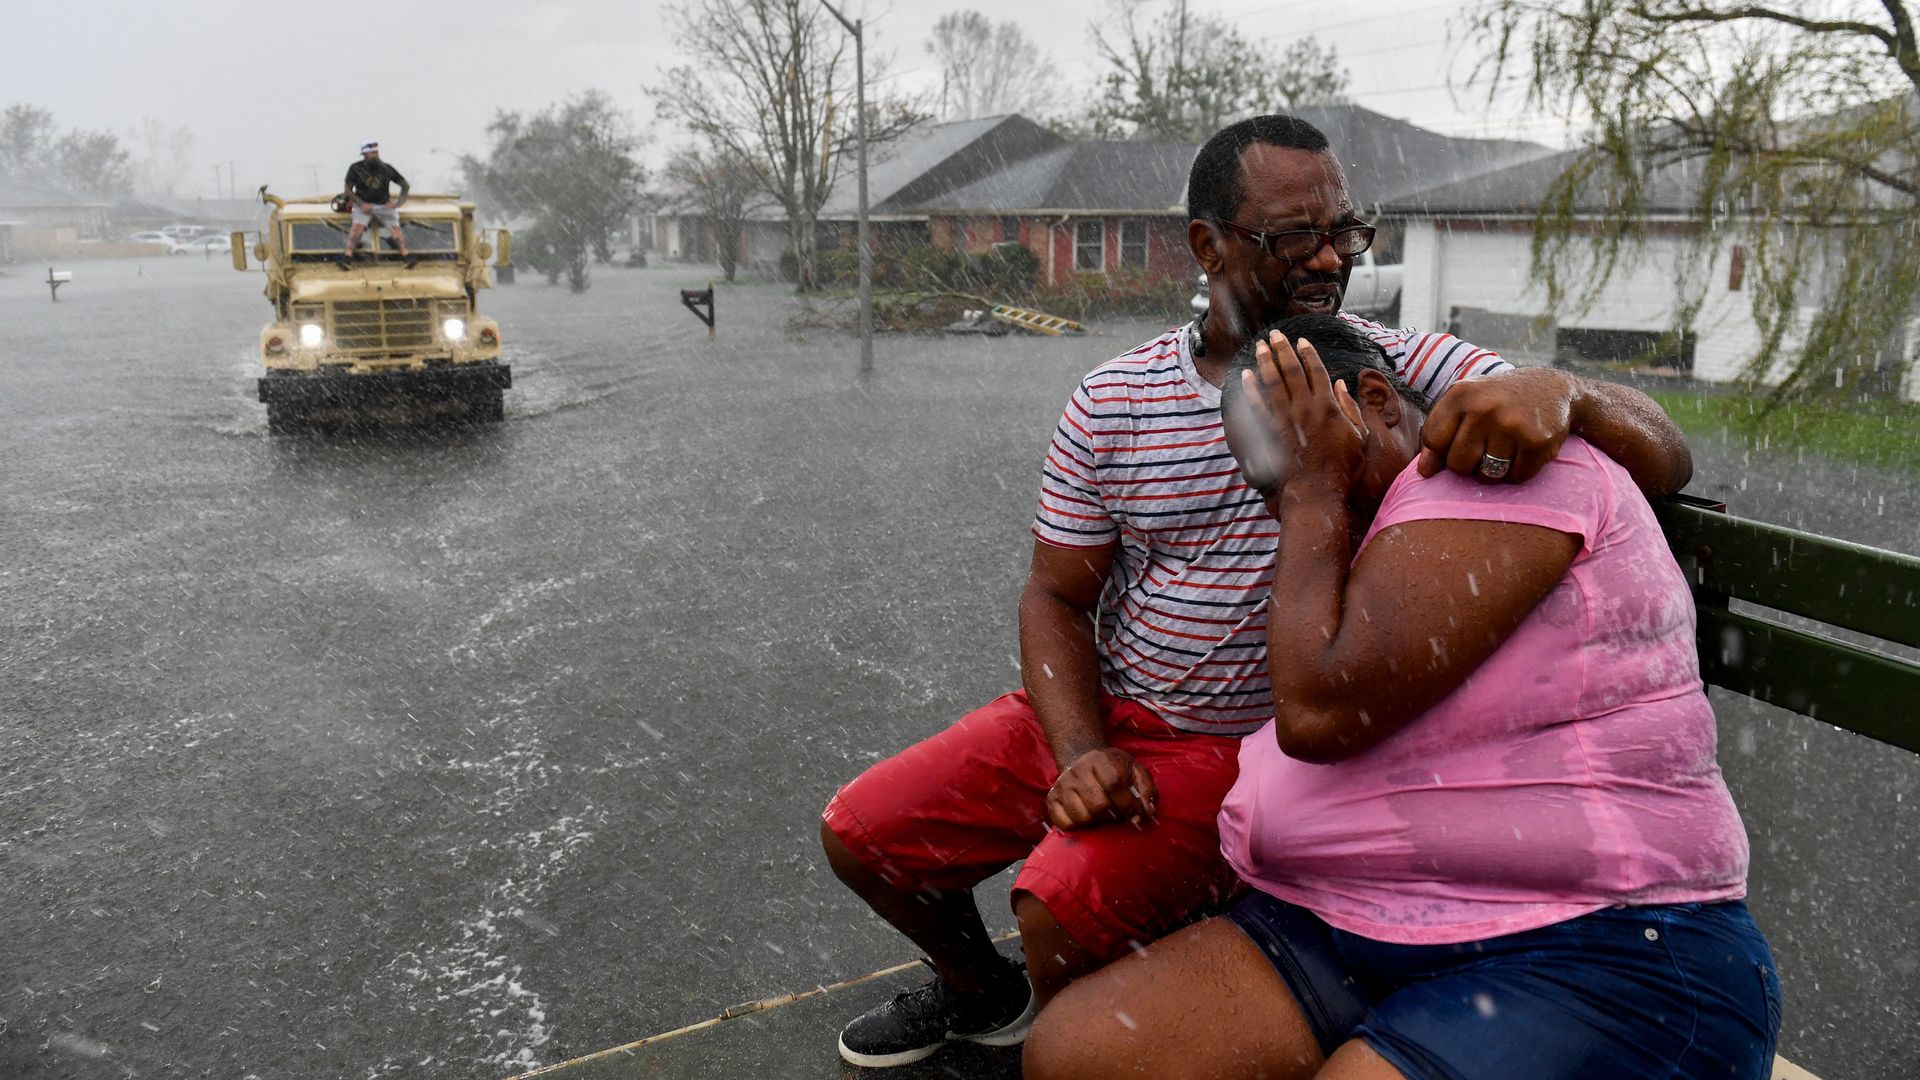 People react as a sudden rain shower soaks them with water while riding out of a flooded neighborhood of LaPlace, La.